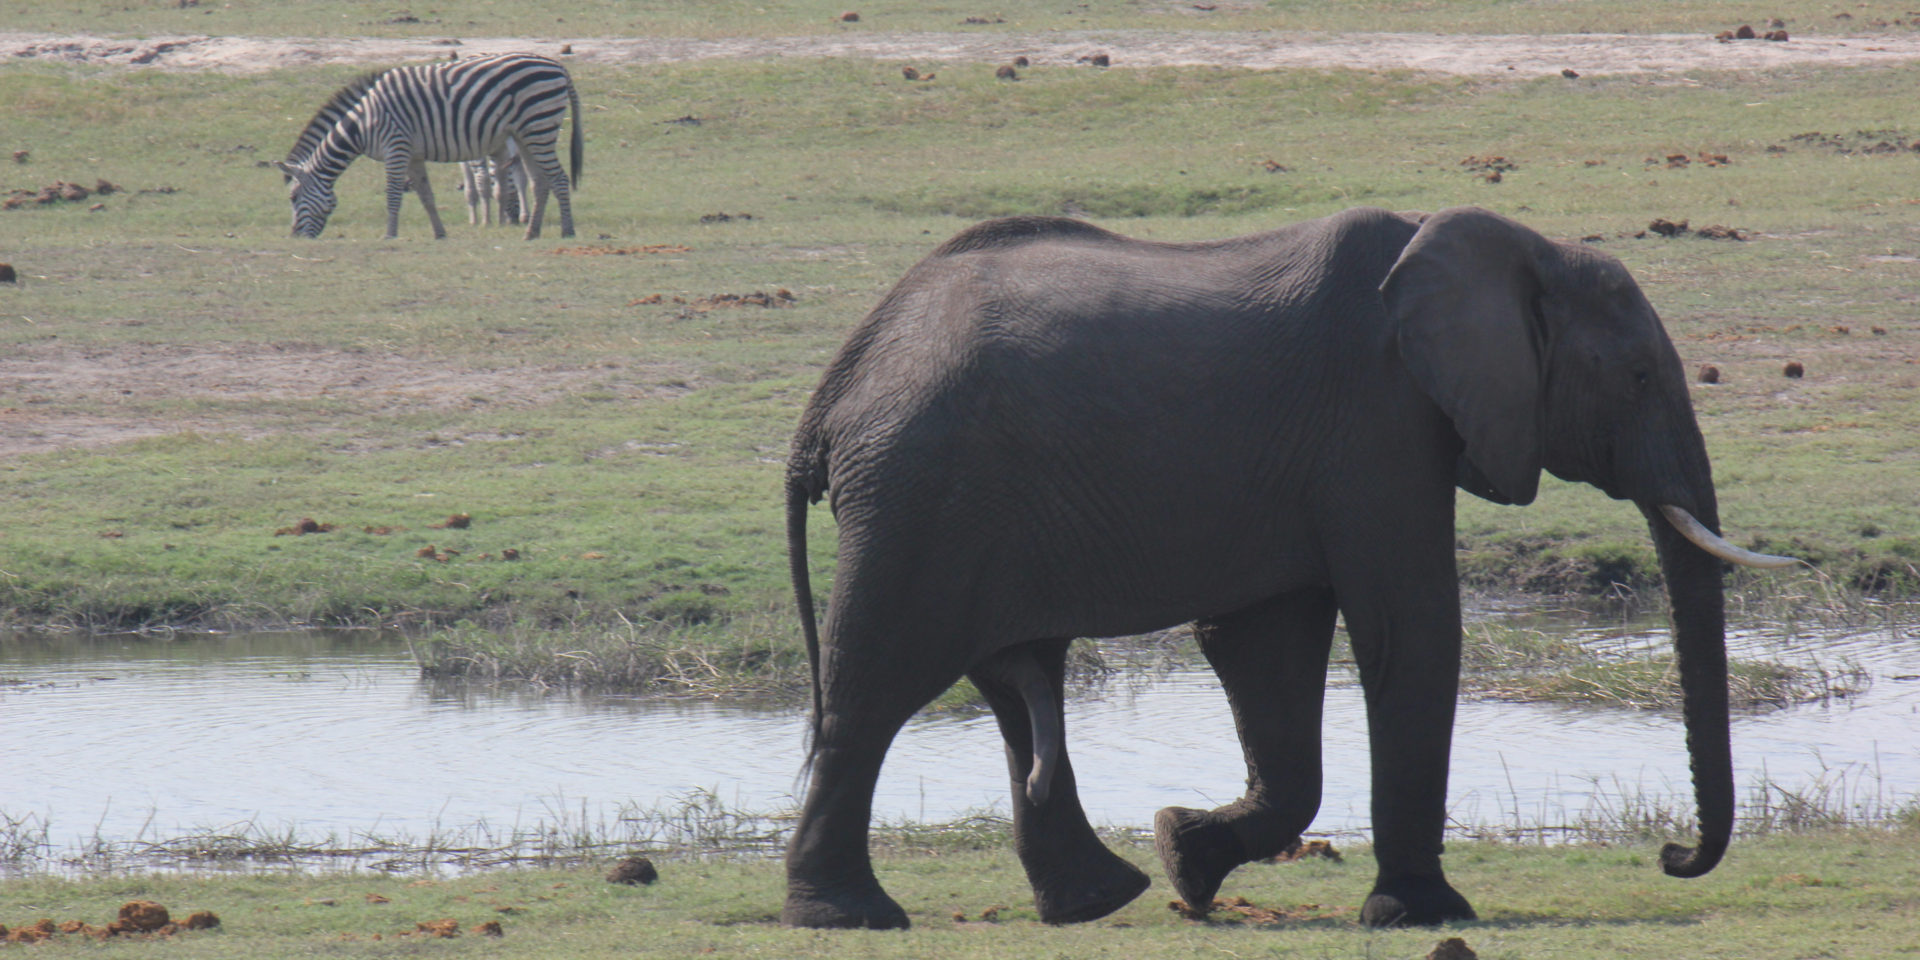 An elephant walking beside a small river in a savanna with two zebras grazing on the opposite side.